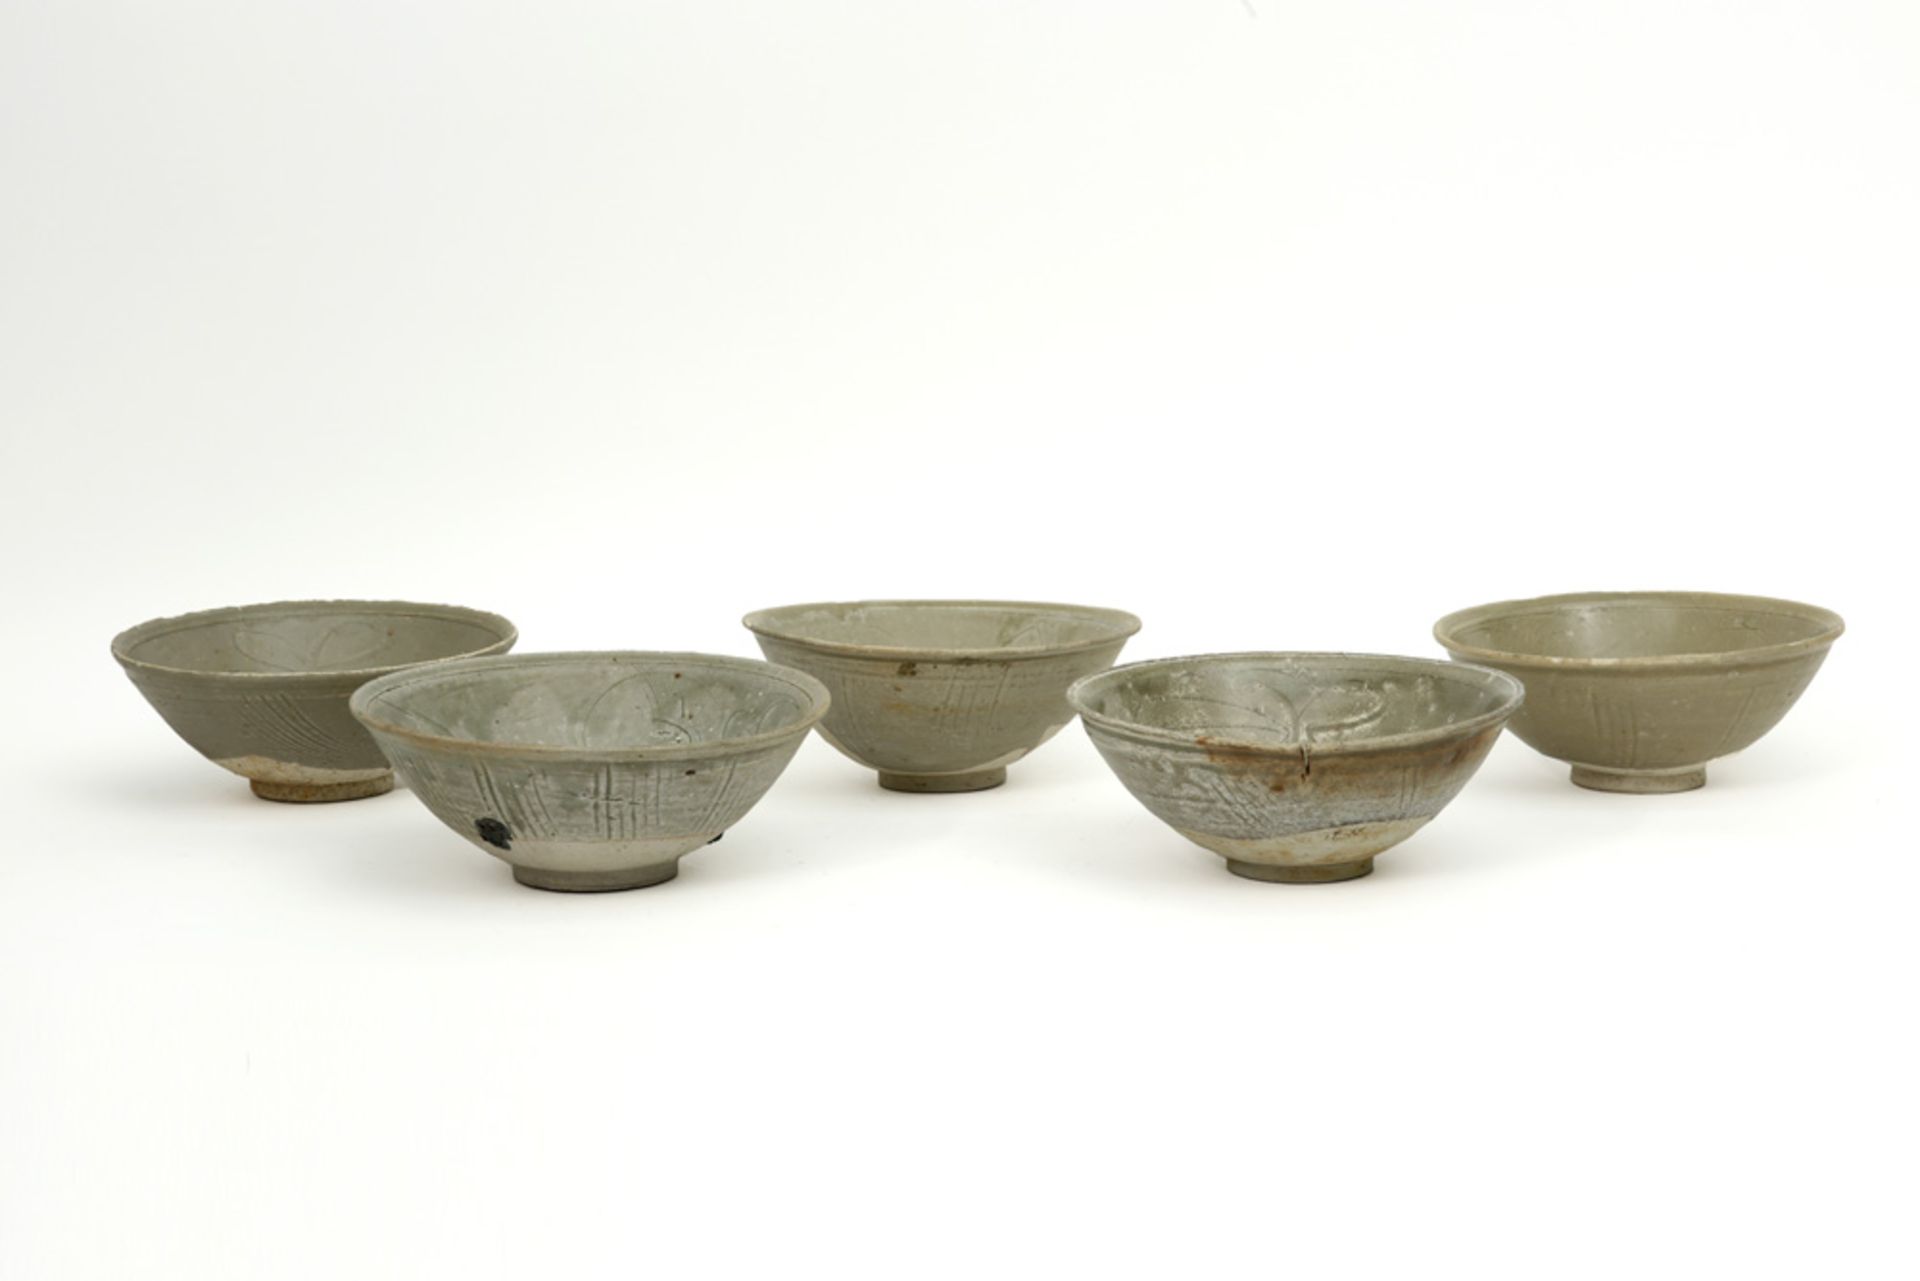 series of five Chinese Song period bowls in earthenware with grey celadon glaze prov : the shipwreck